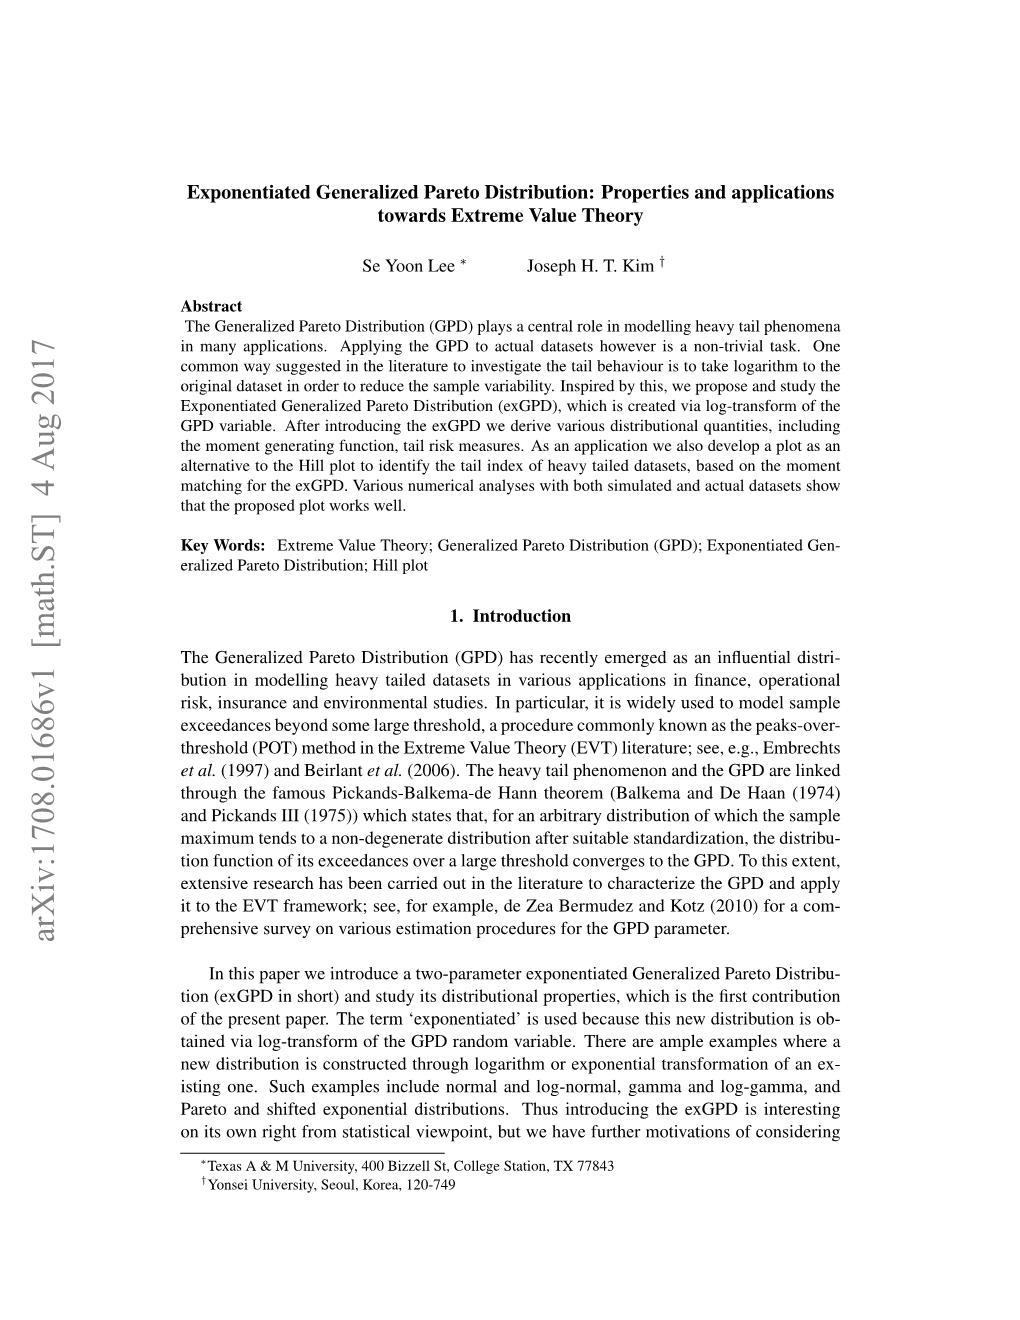 Exponentiated Generalized Pareto Distribution: Properties and Applications Towards Extreme Value Theory